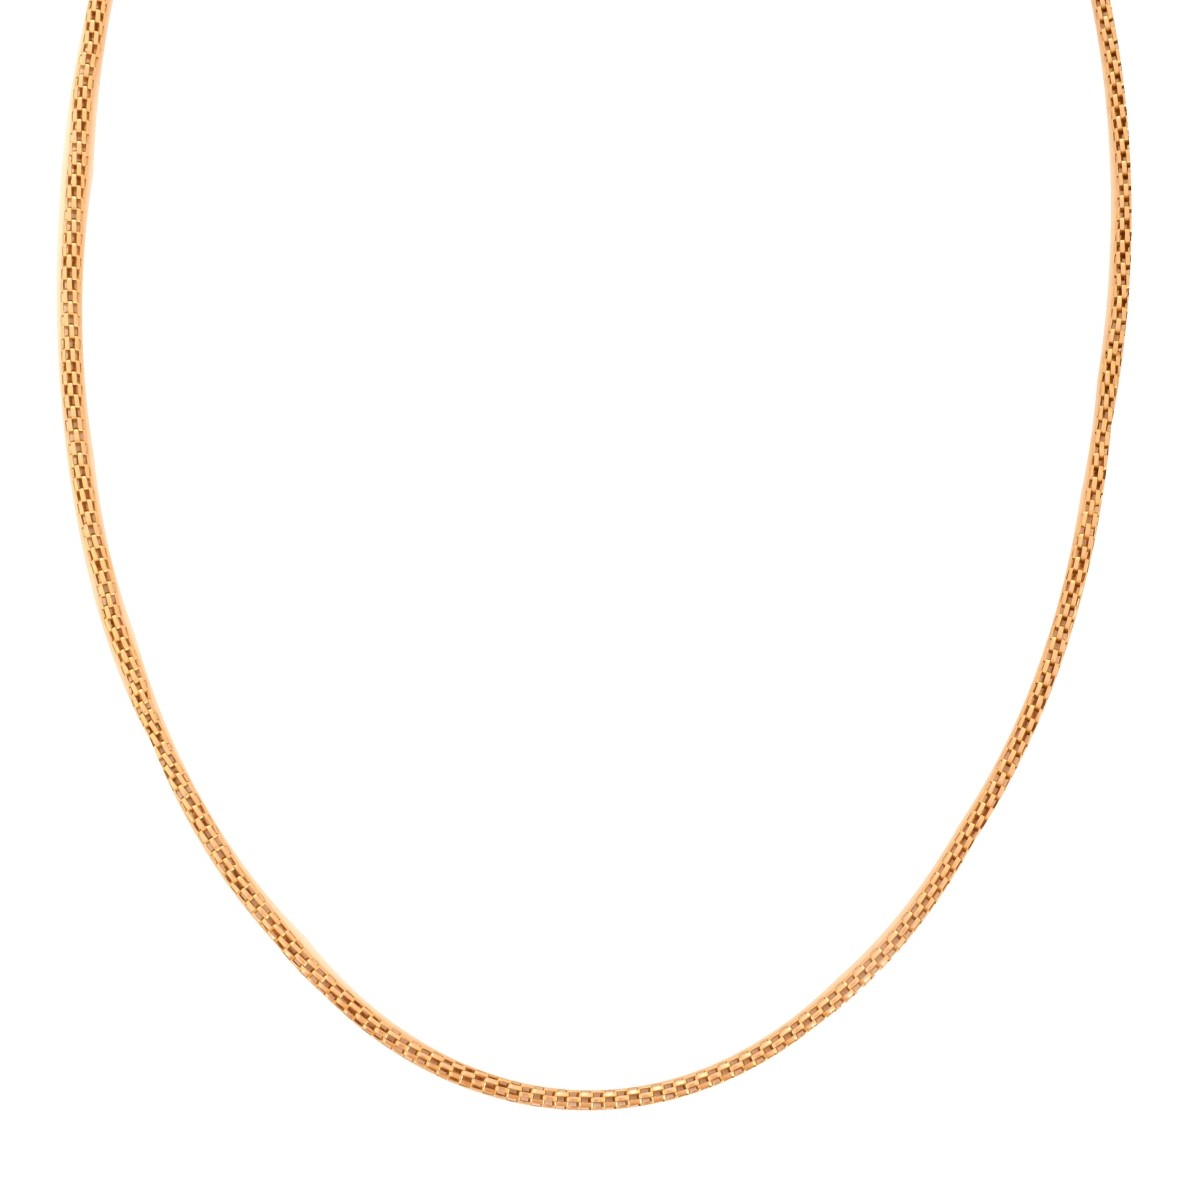 18K Chain / Necklace